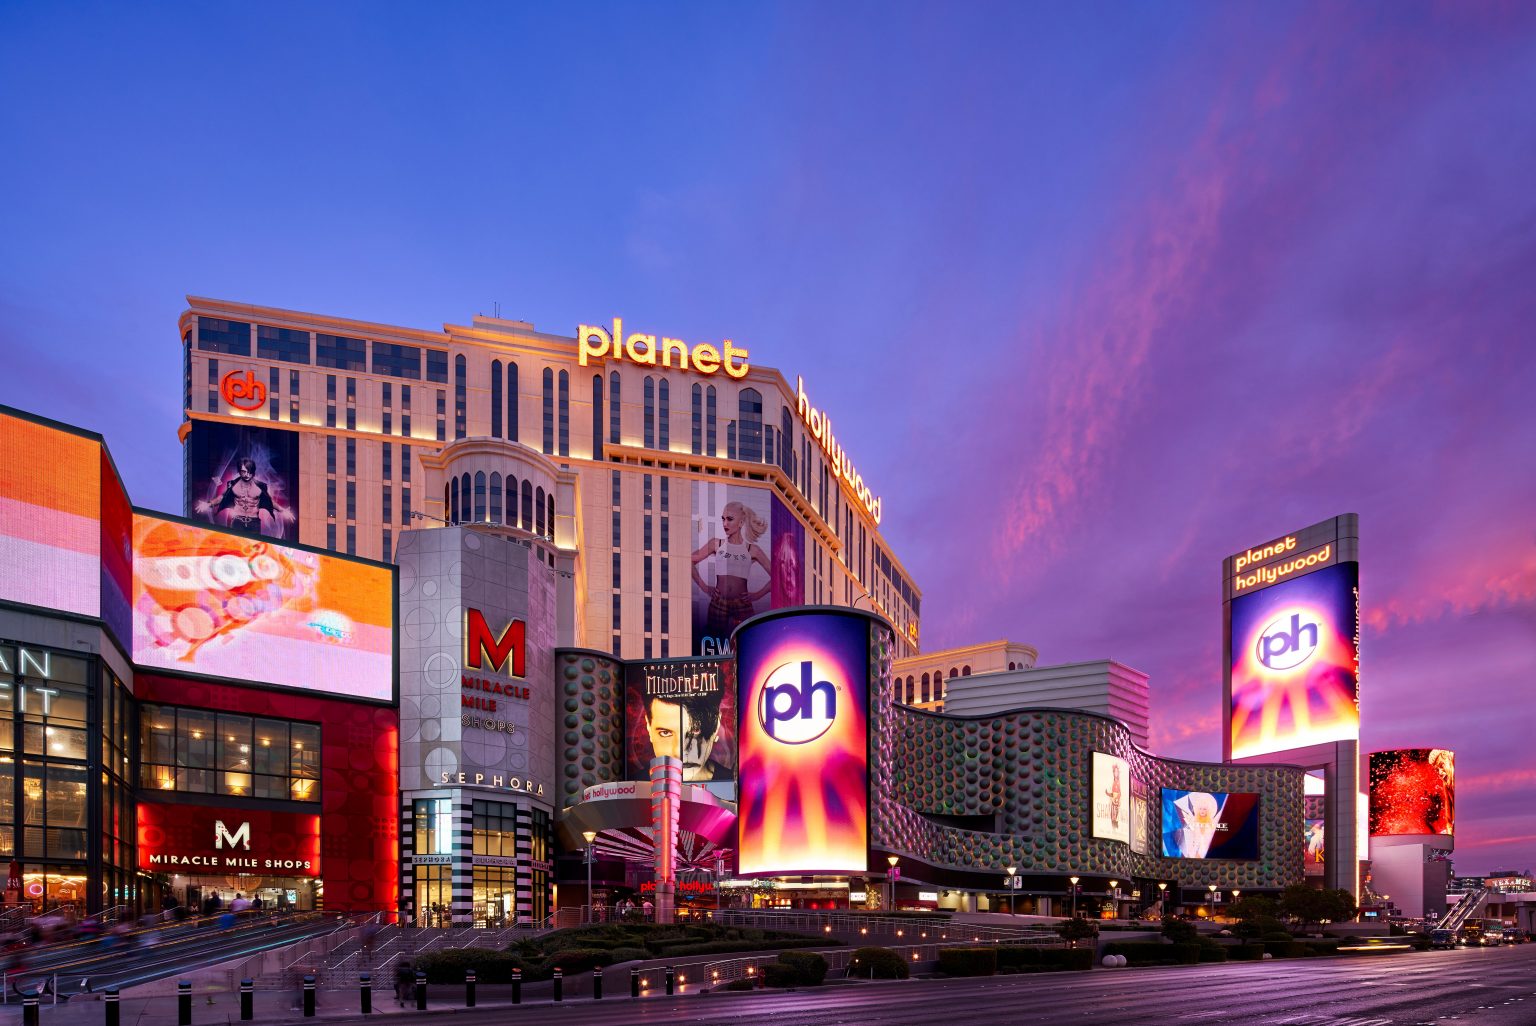 Caesars To Resume Seven Day Hotel Service At Planet Hollywood The Linq This Month Laptrinhx